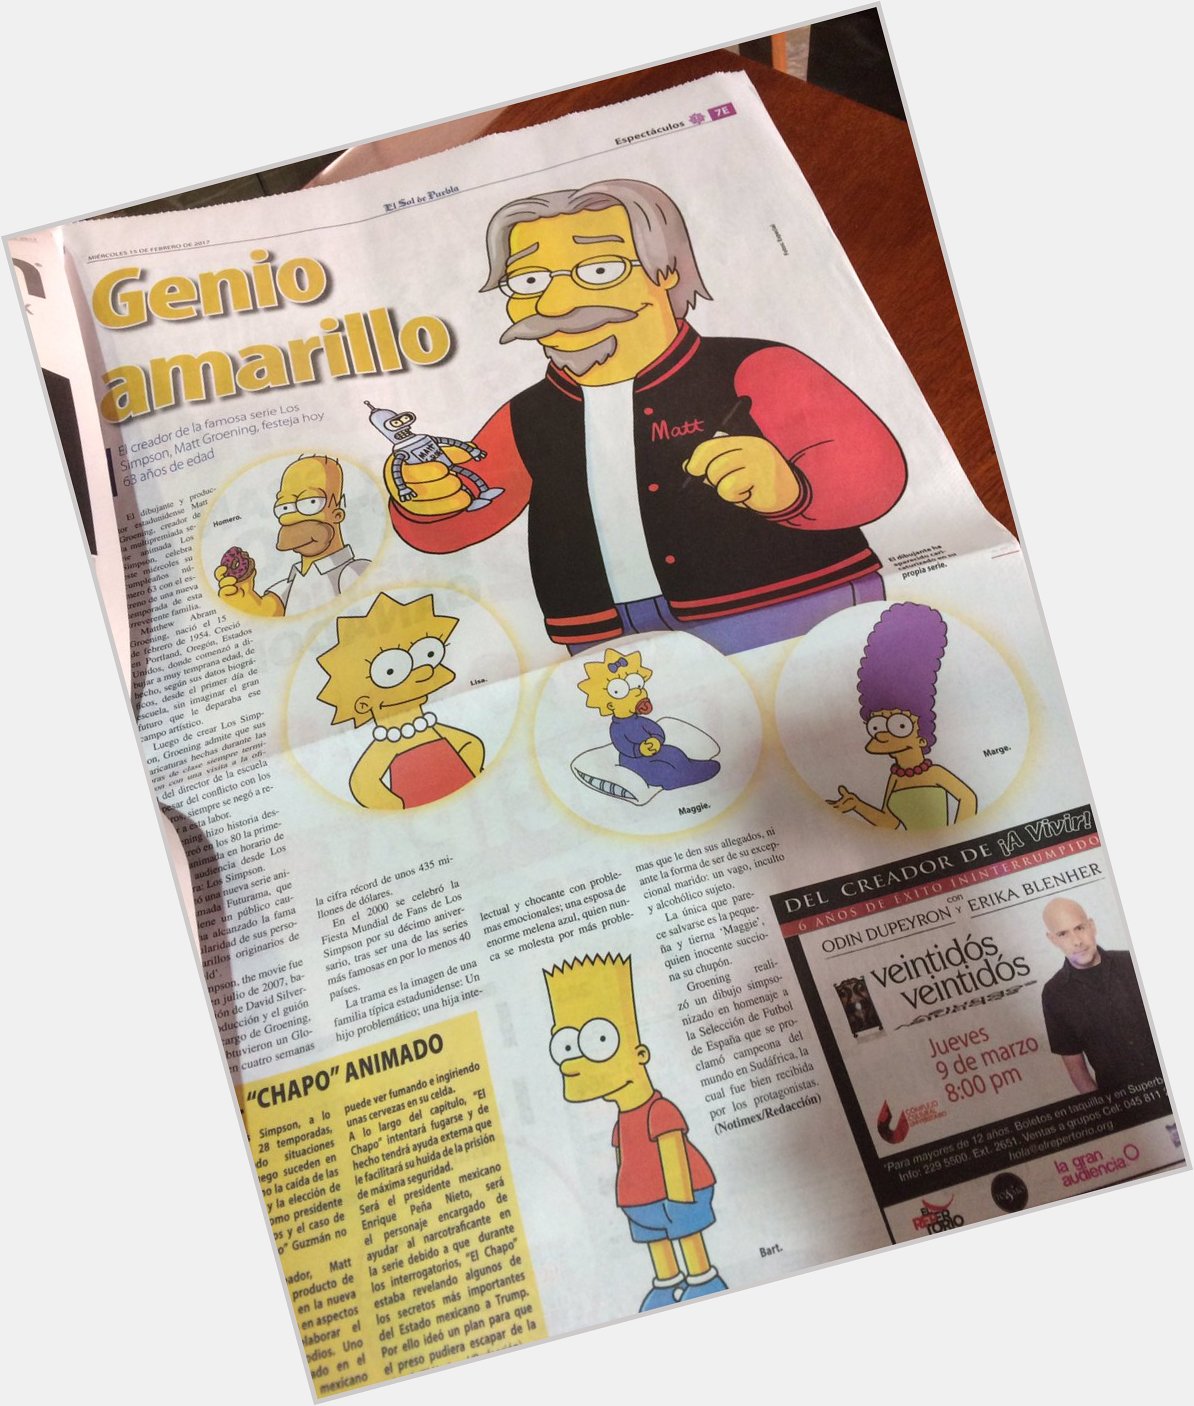 Happy Bday 4 the one & only Matt Groening. Thanks 4 Today printing on  